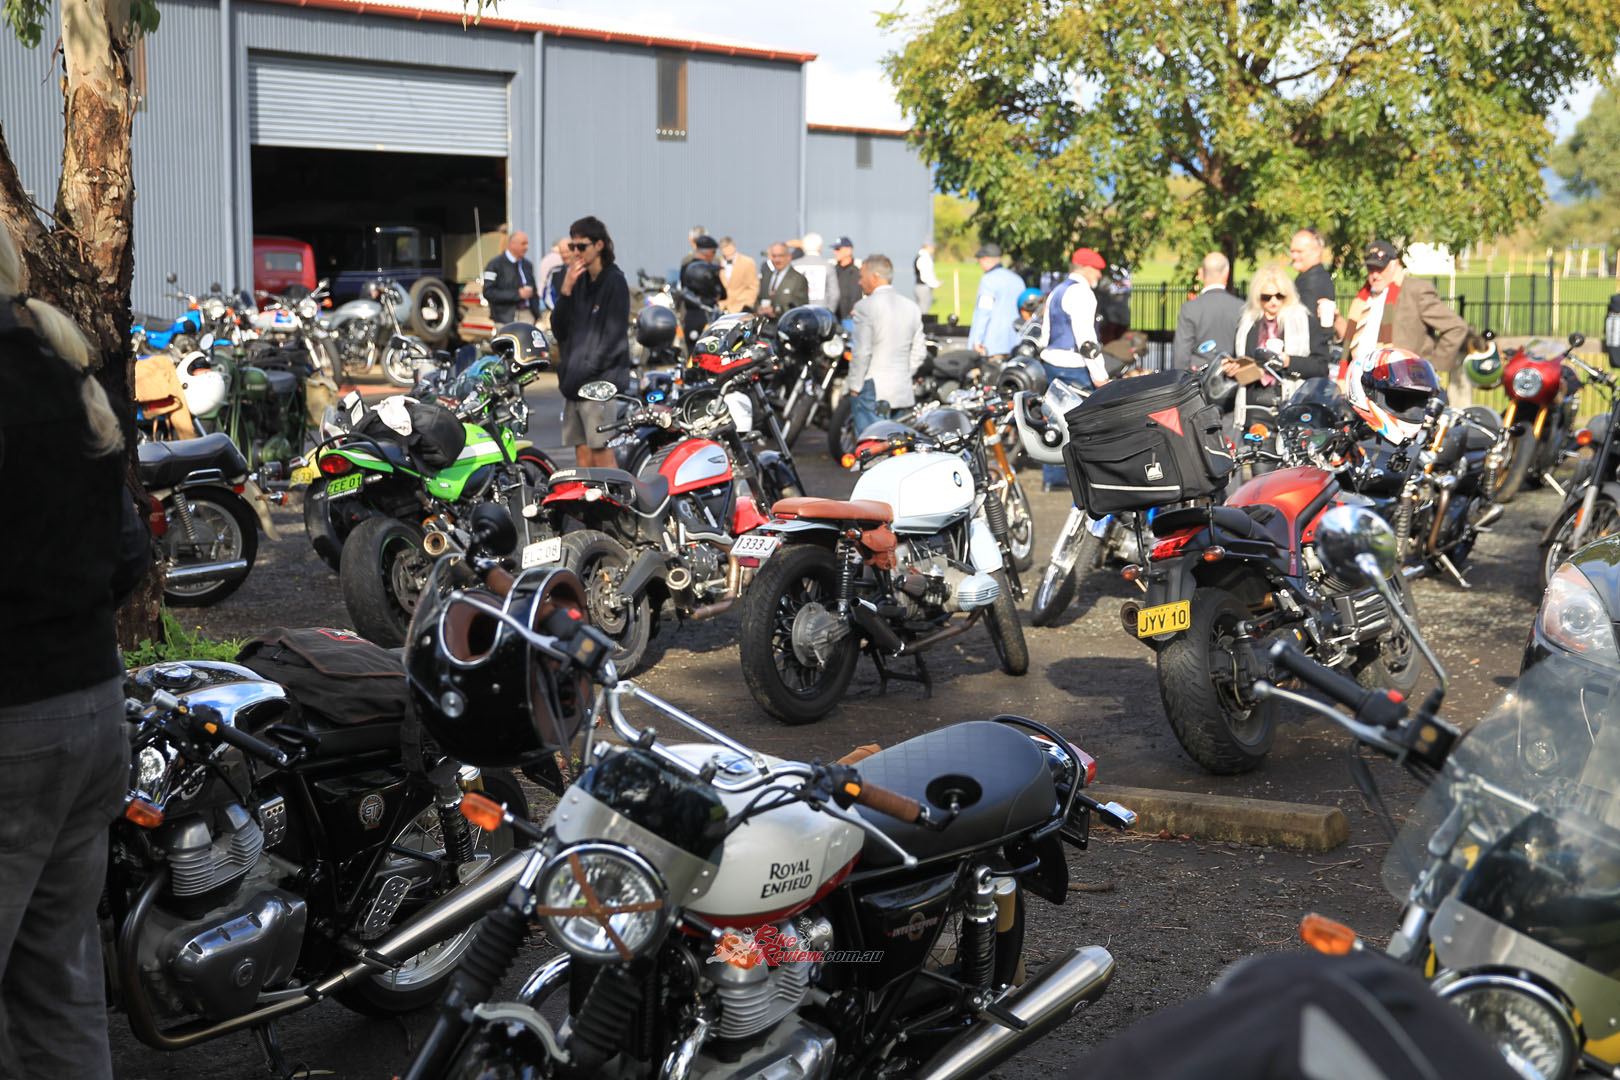 The ride kicked off at the Australian Motorlife Museum in Kembla Grange, just south of Wollongong.